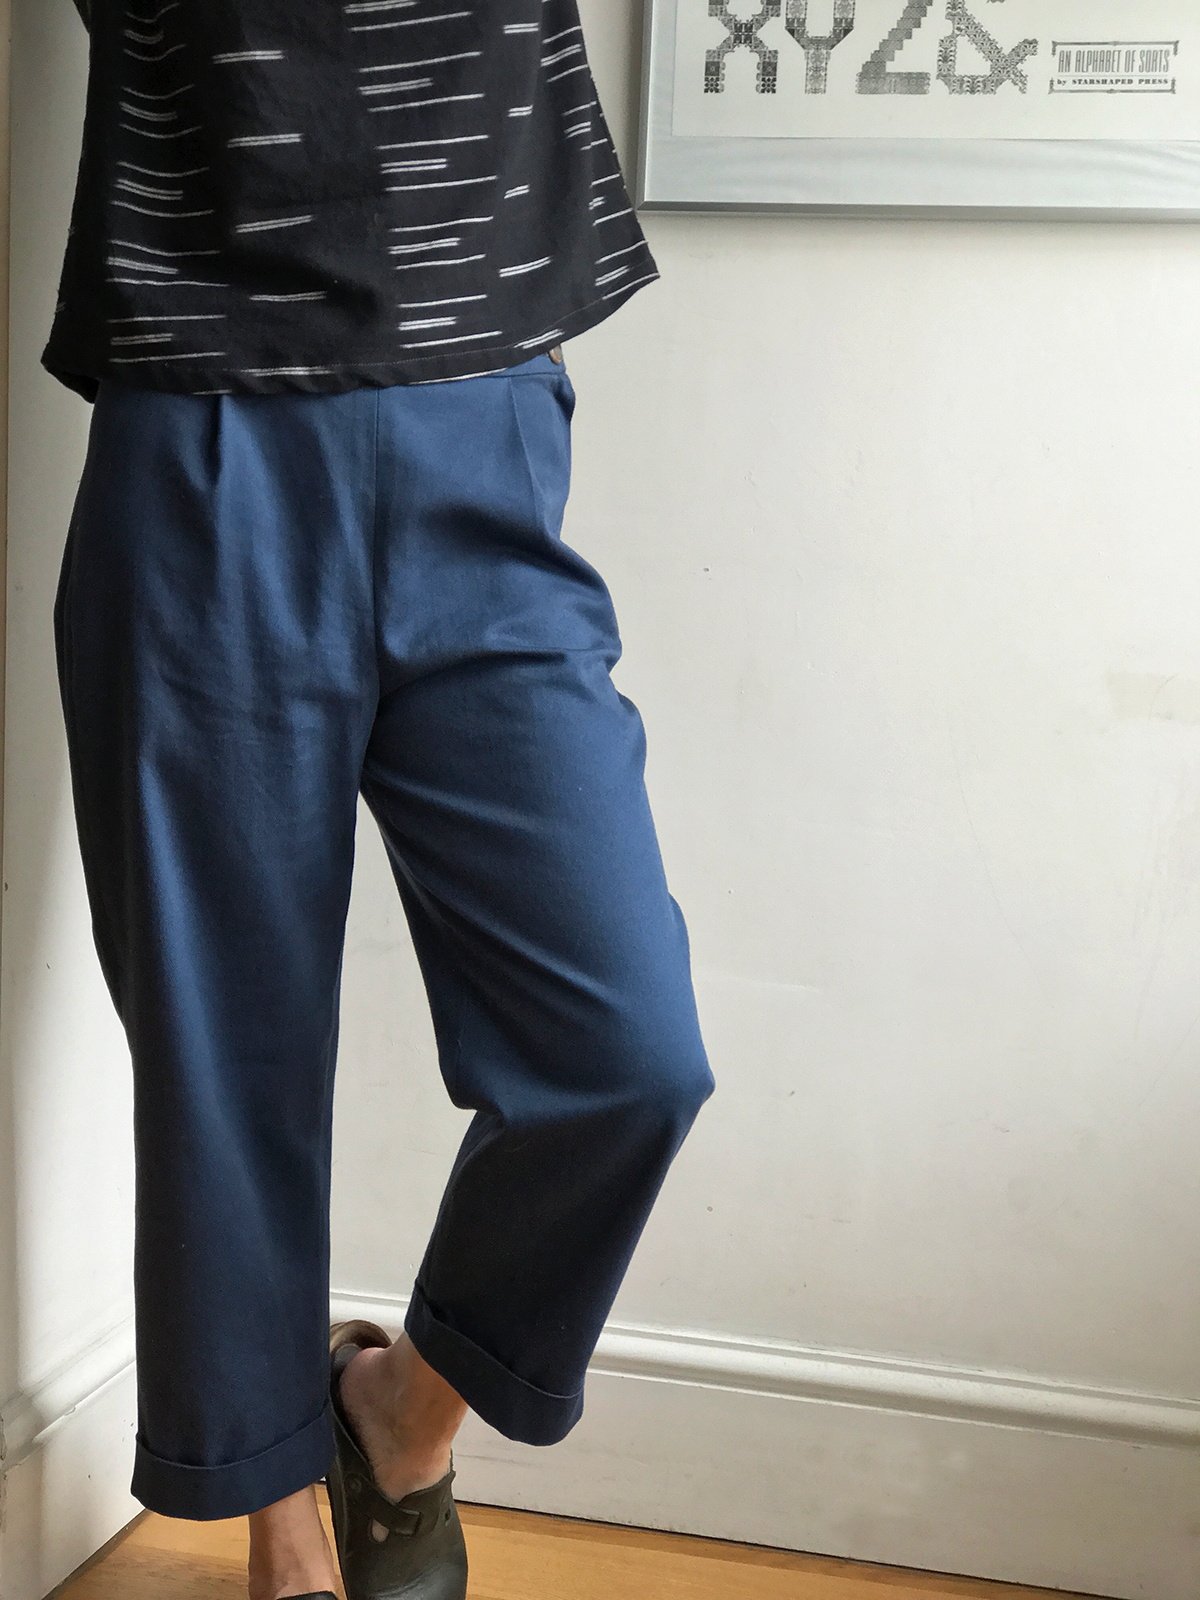 Eve Trousers by Merchant & Mills made in Ventana Twill – FABERWOOD